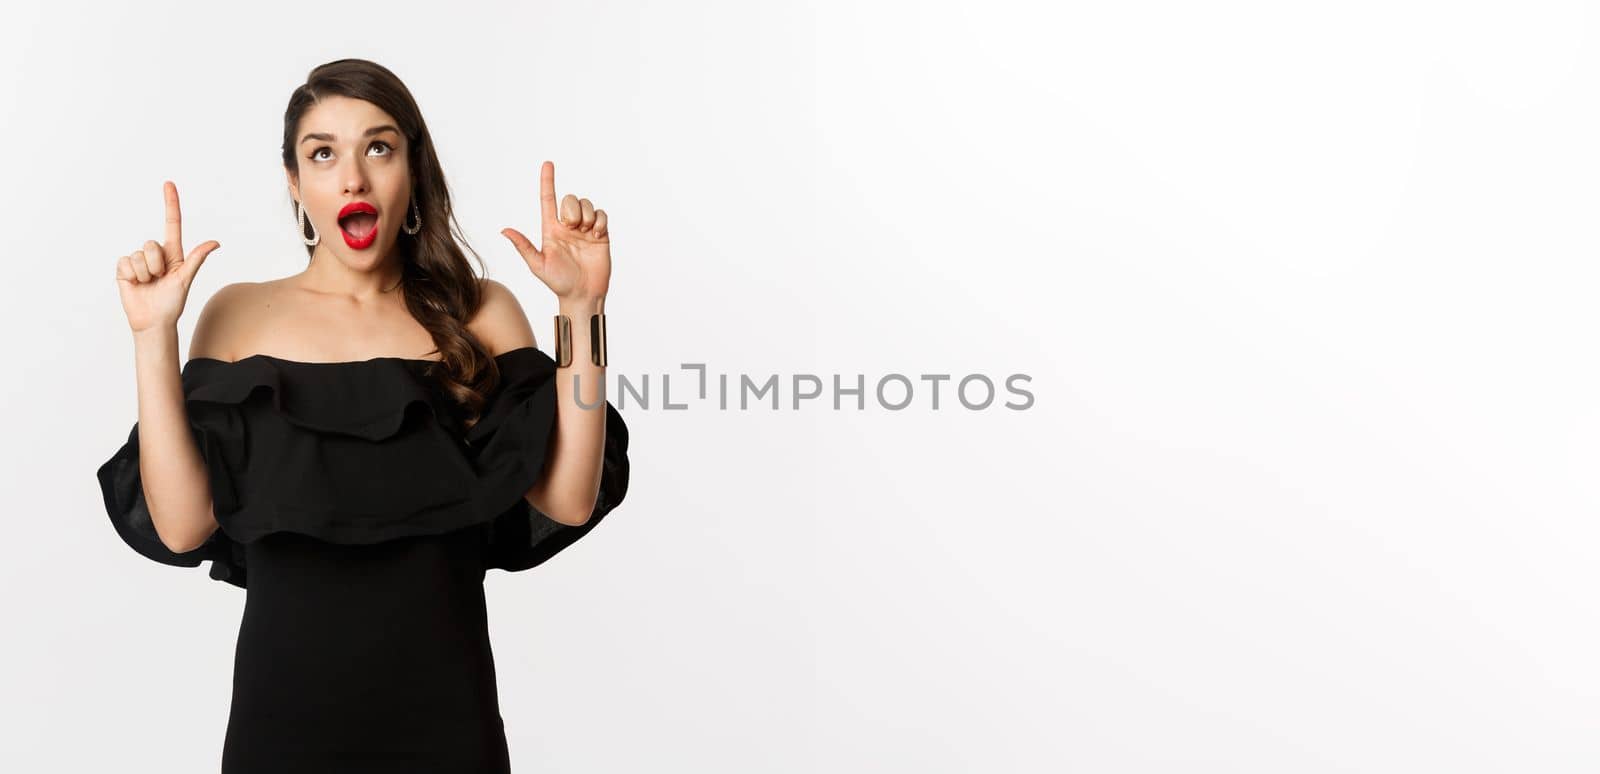 Fashion and beauty. Amused woman in black dress looking and pointing fingers up at promo offer, standing over white background.